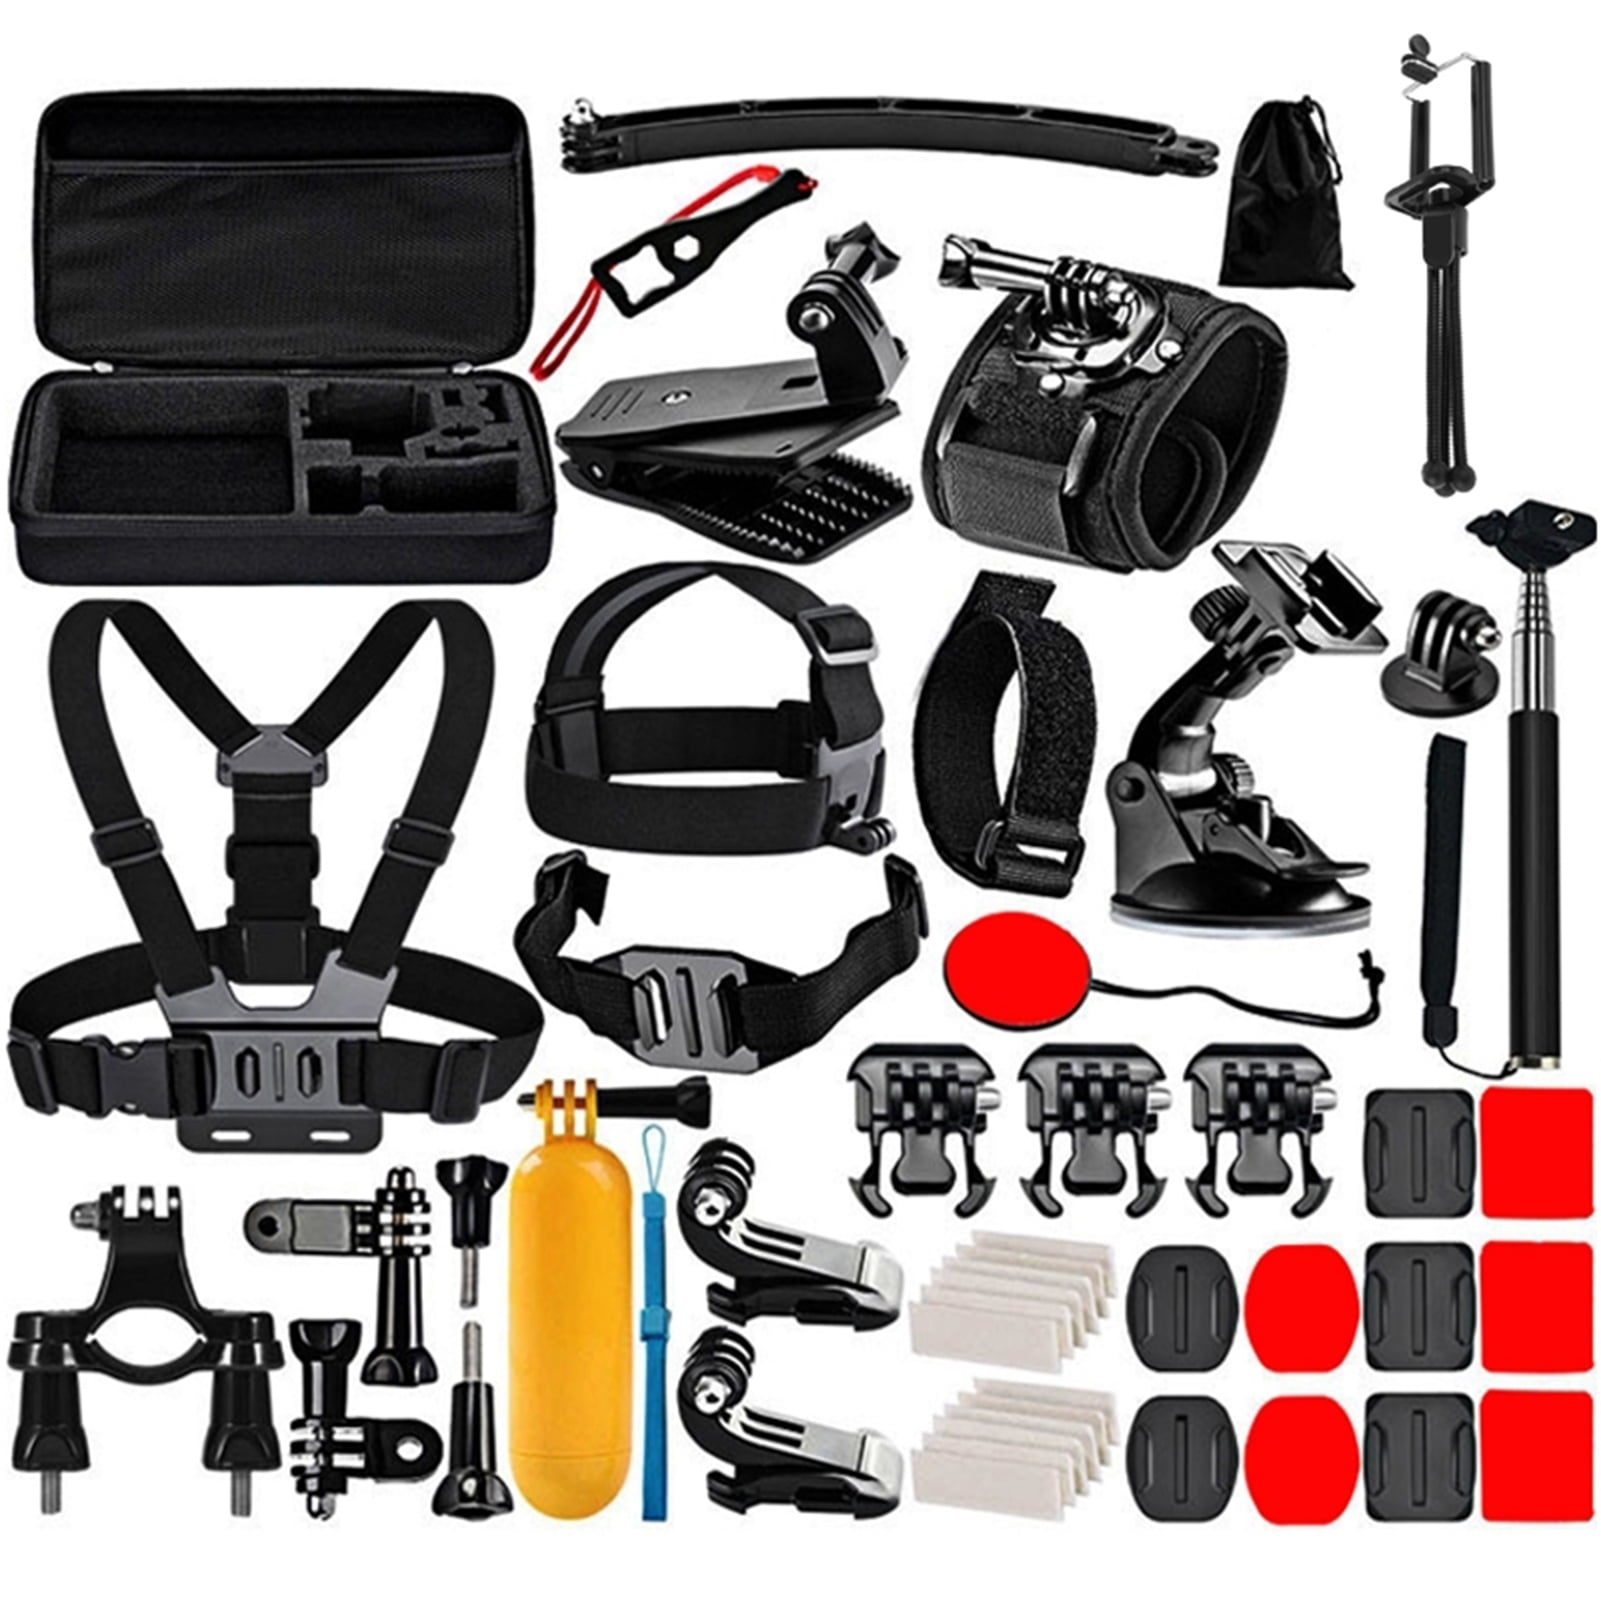 Selfie Monopod 7 in 1 Chest Belt Wrist Belt Xiaoyi and Other Action Cameras Reli Head Strap Tripod Mount Carry Bag Set for GoPro New Hero / HERO7 /6/5 /5 Session /4 Session /4/3+ /3/2 /1 